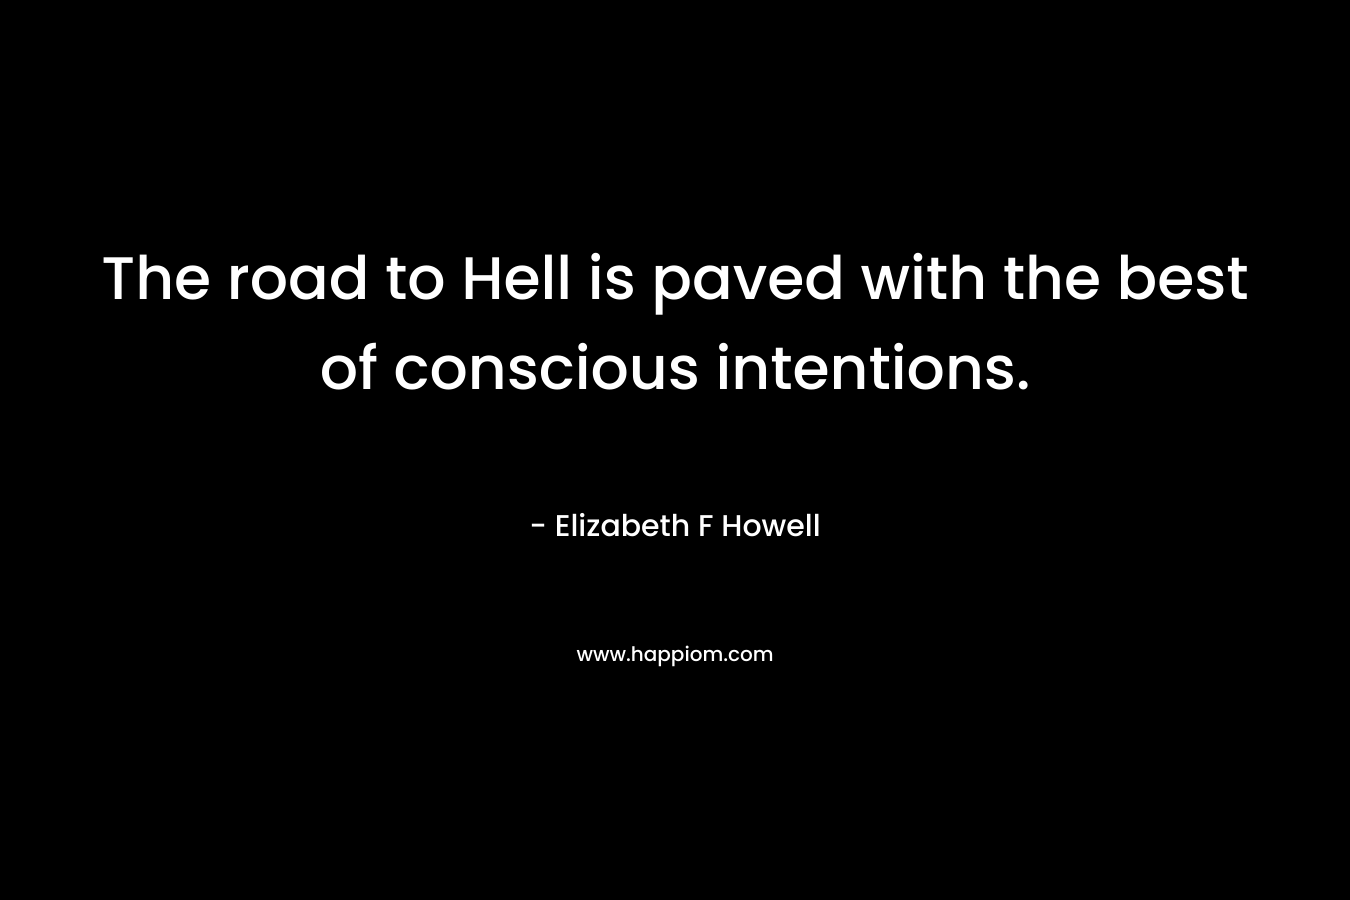 The road to Hell is paved with the best of conscious intentions.